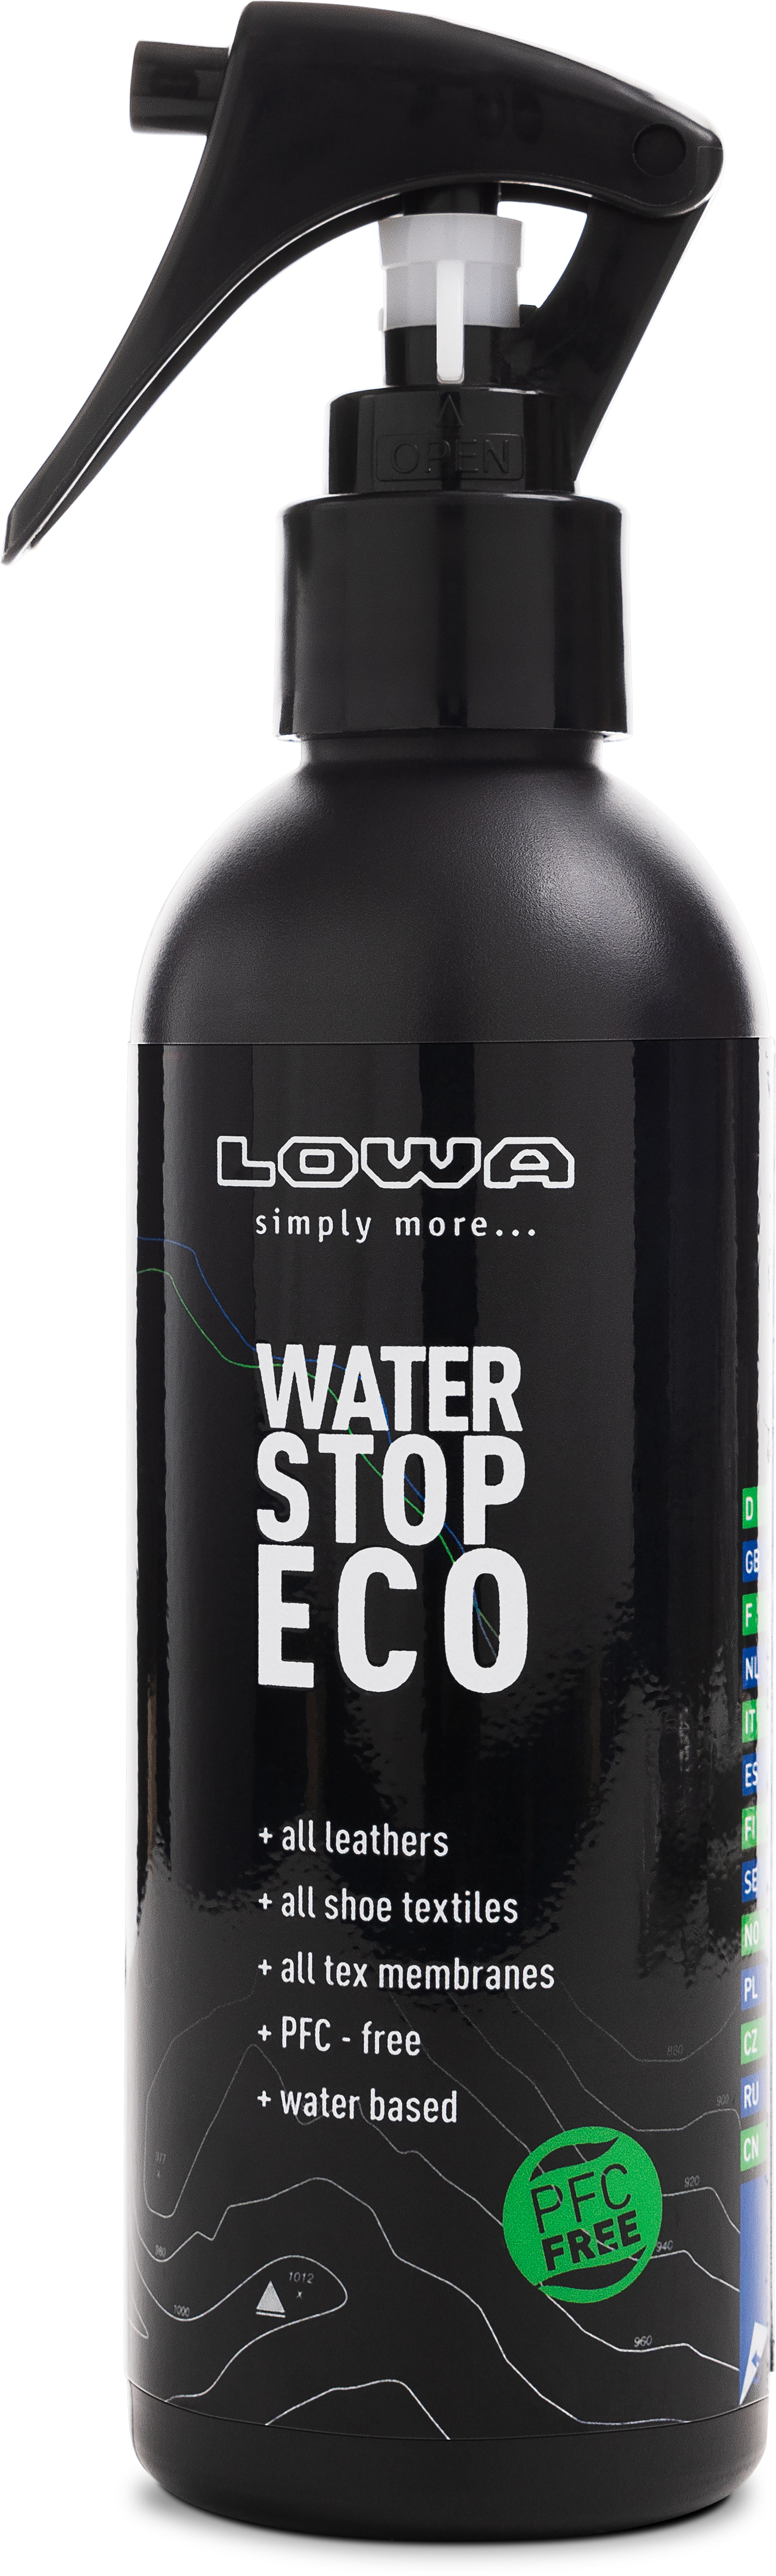 WATER STOP ECO 200 ml: CARE | LOWA INT